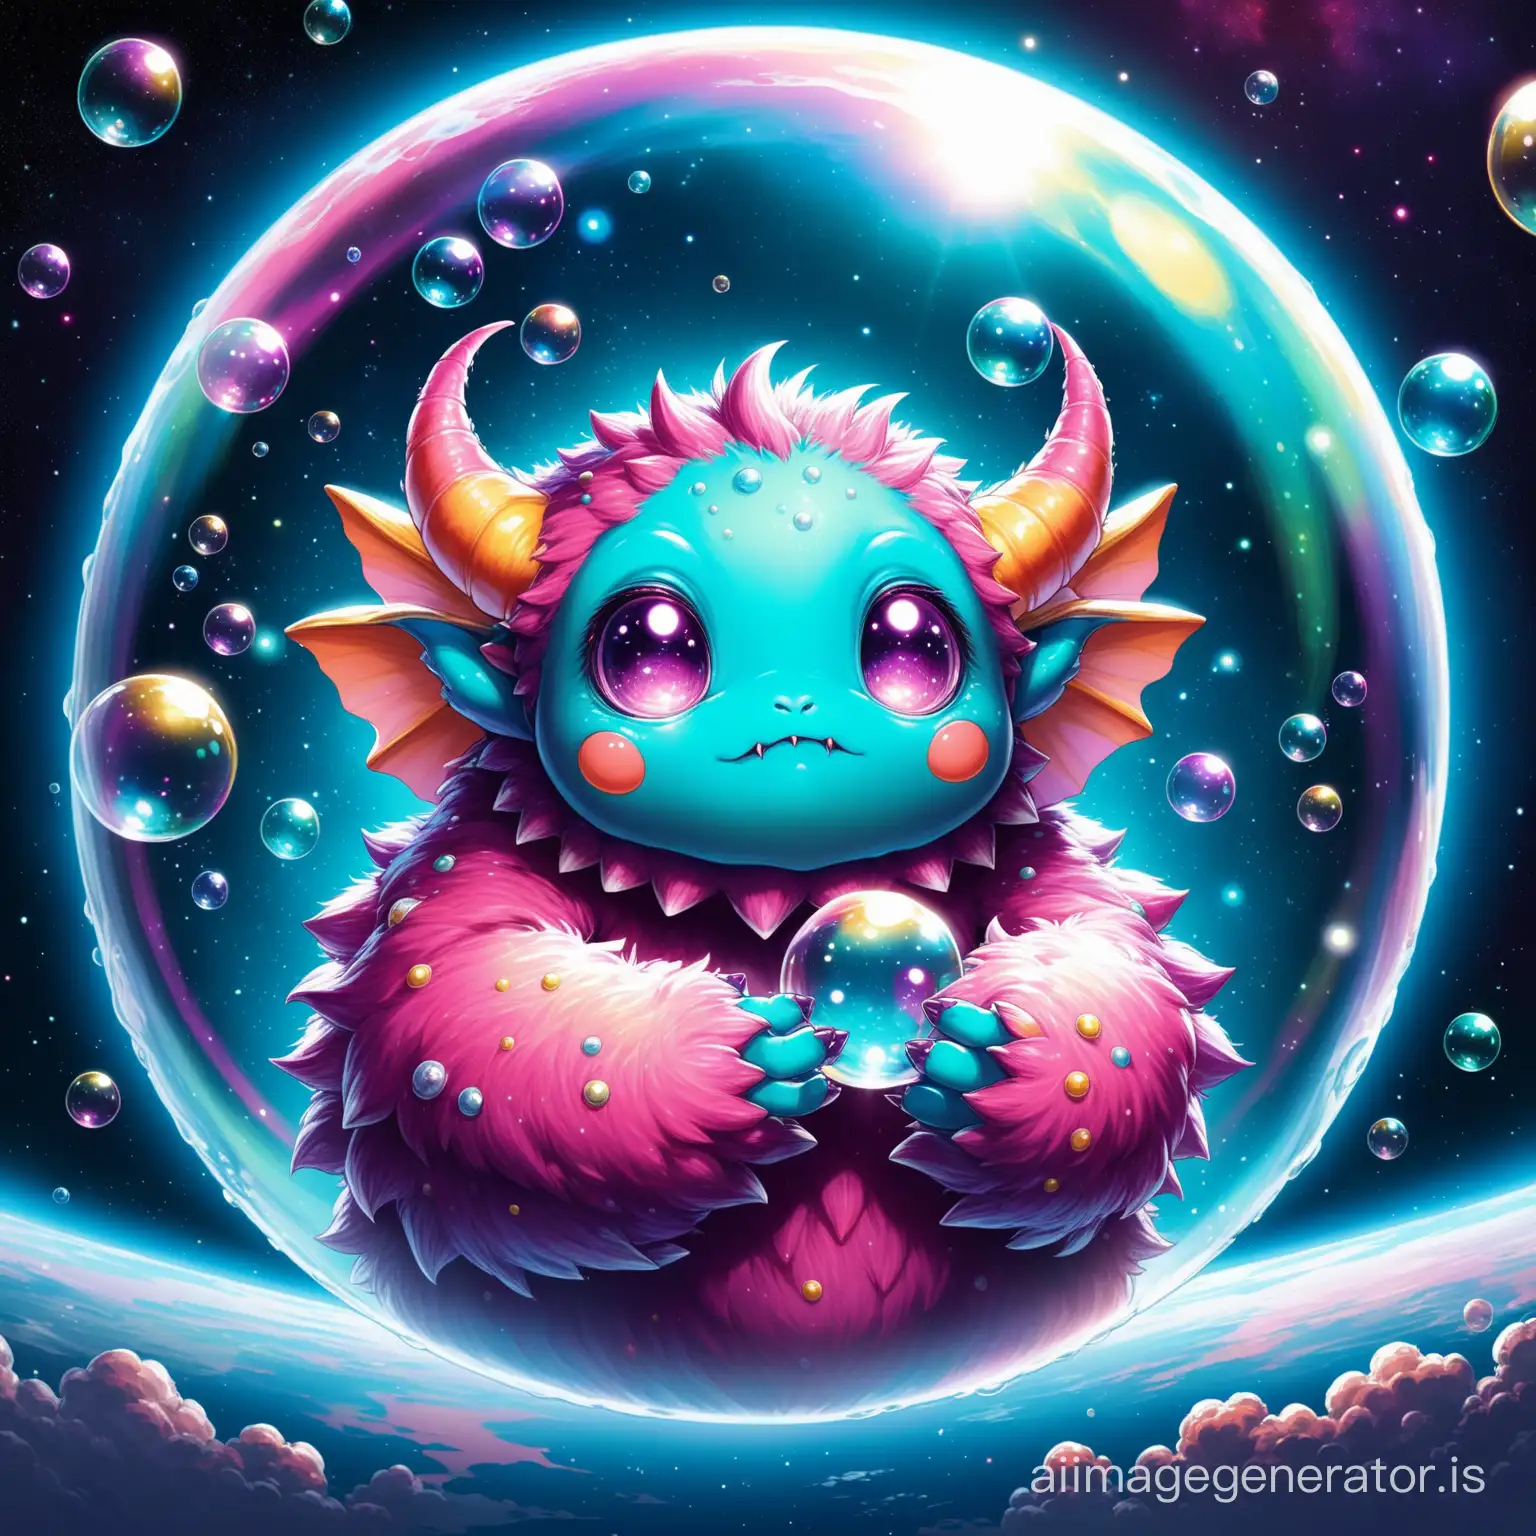 Adorable-Monster-Baby-in-Space-with-Enormous-Bubble